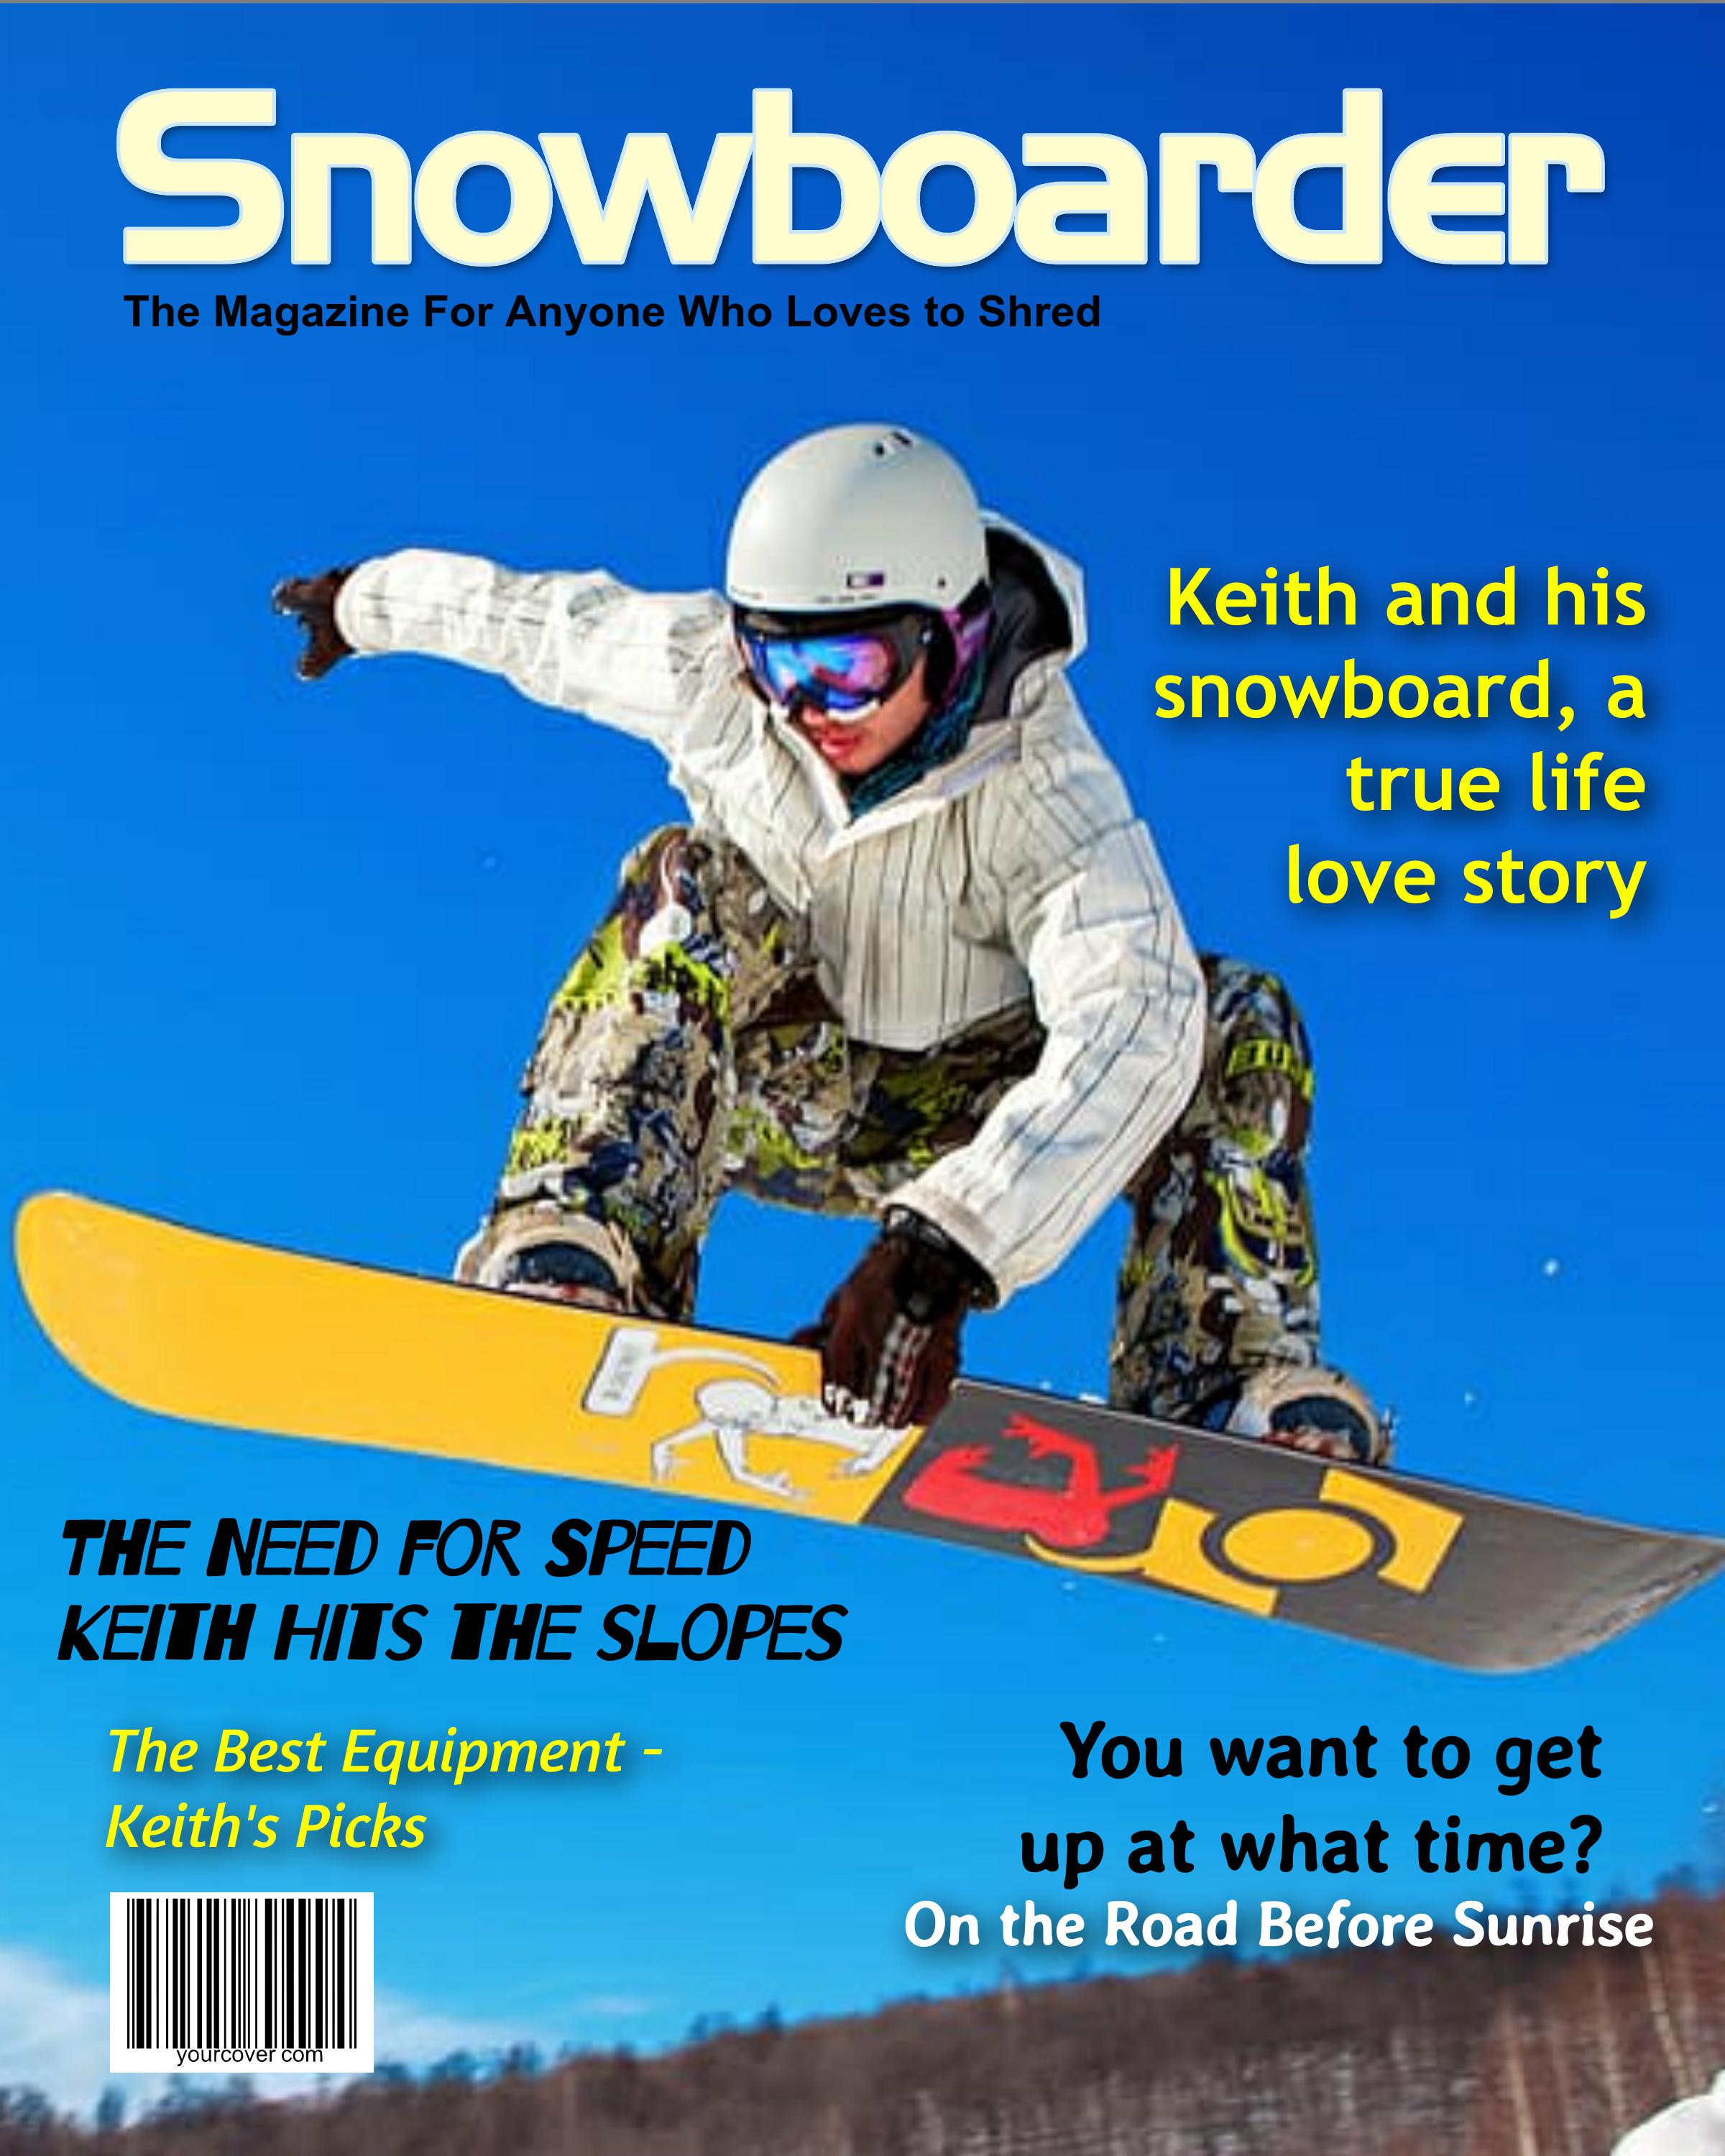 Look: Cover of New Basketball Magazine Looks Like Snowboarder From